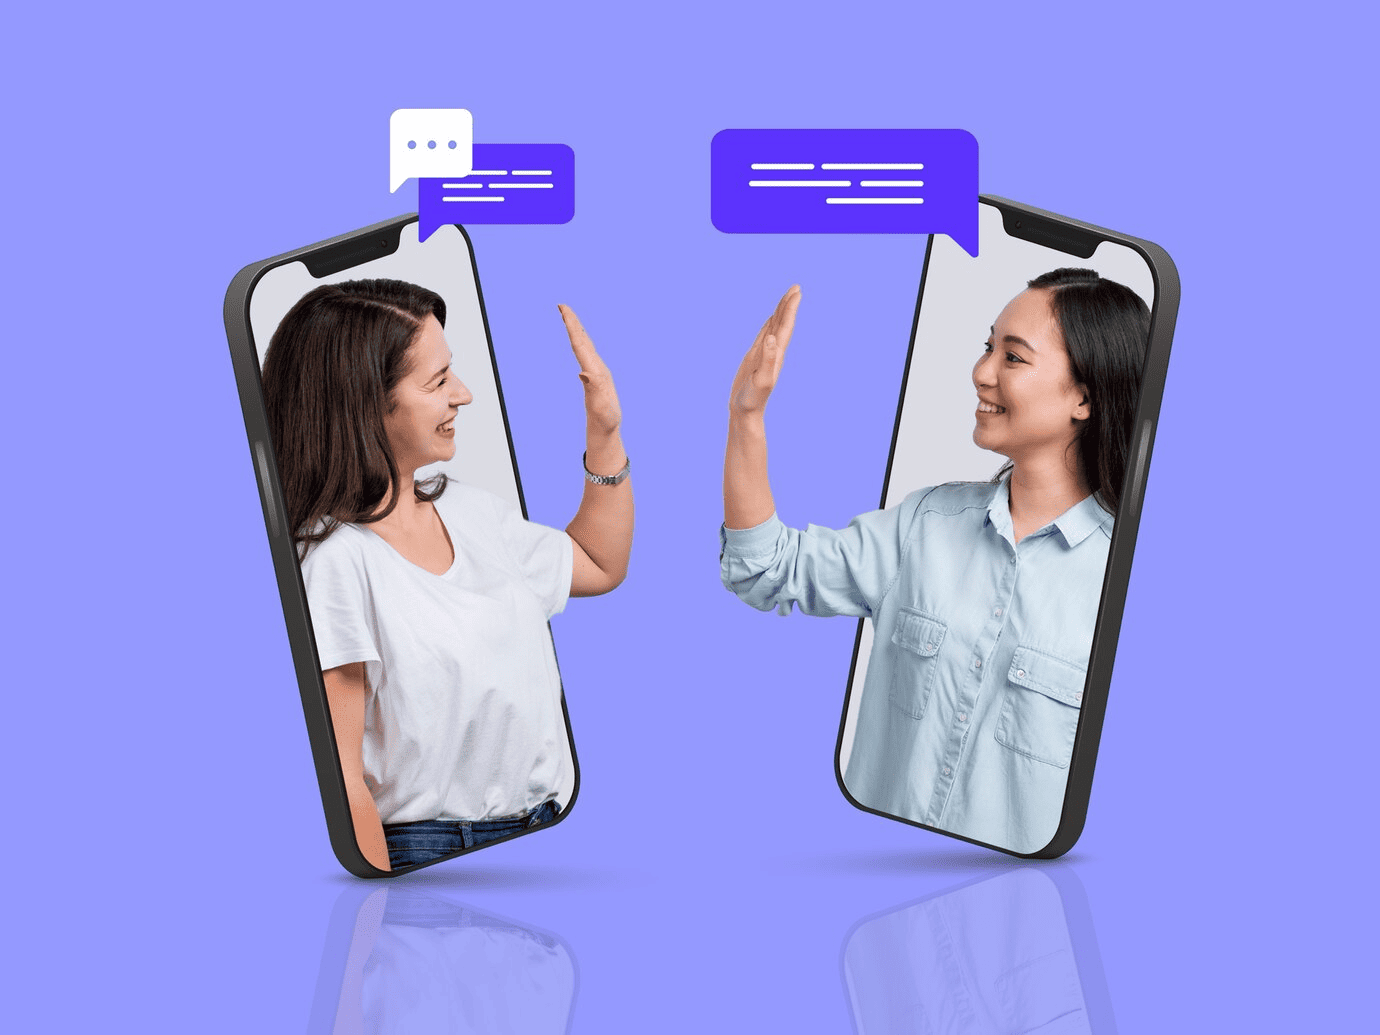 two people translating using a phone app